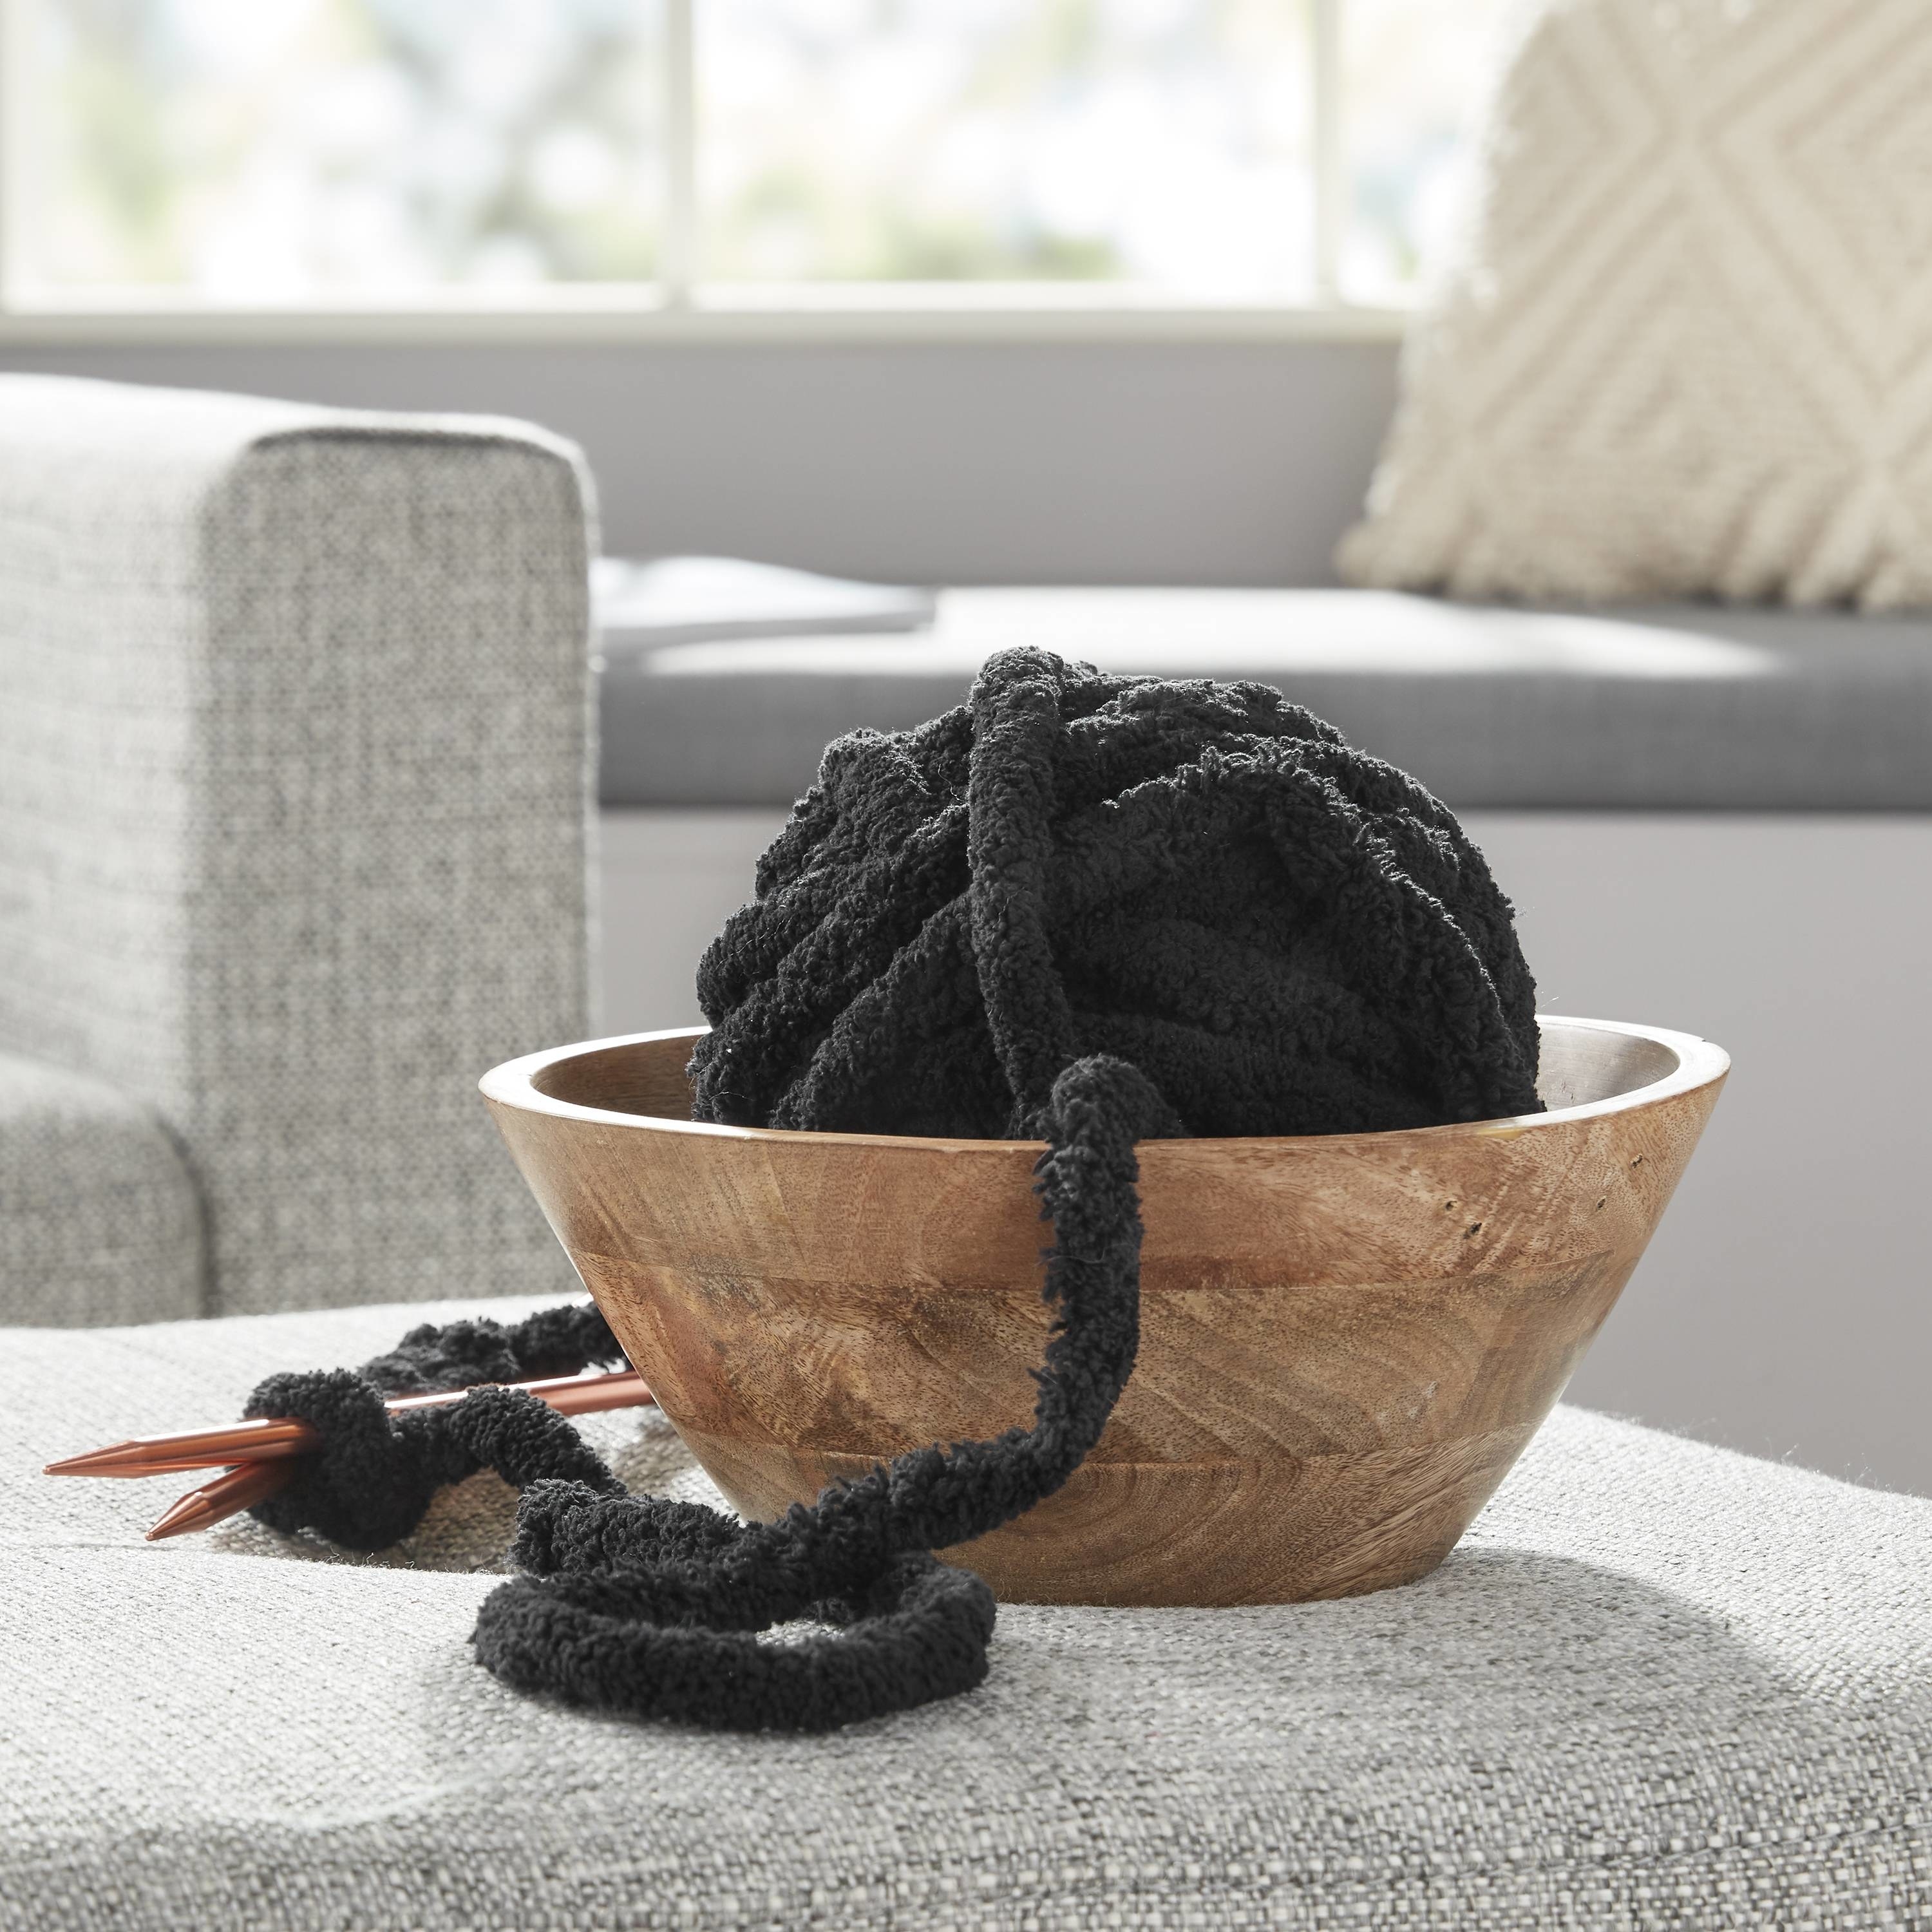 The black yarn in a wooden bowl